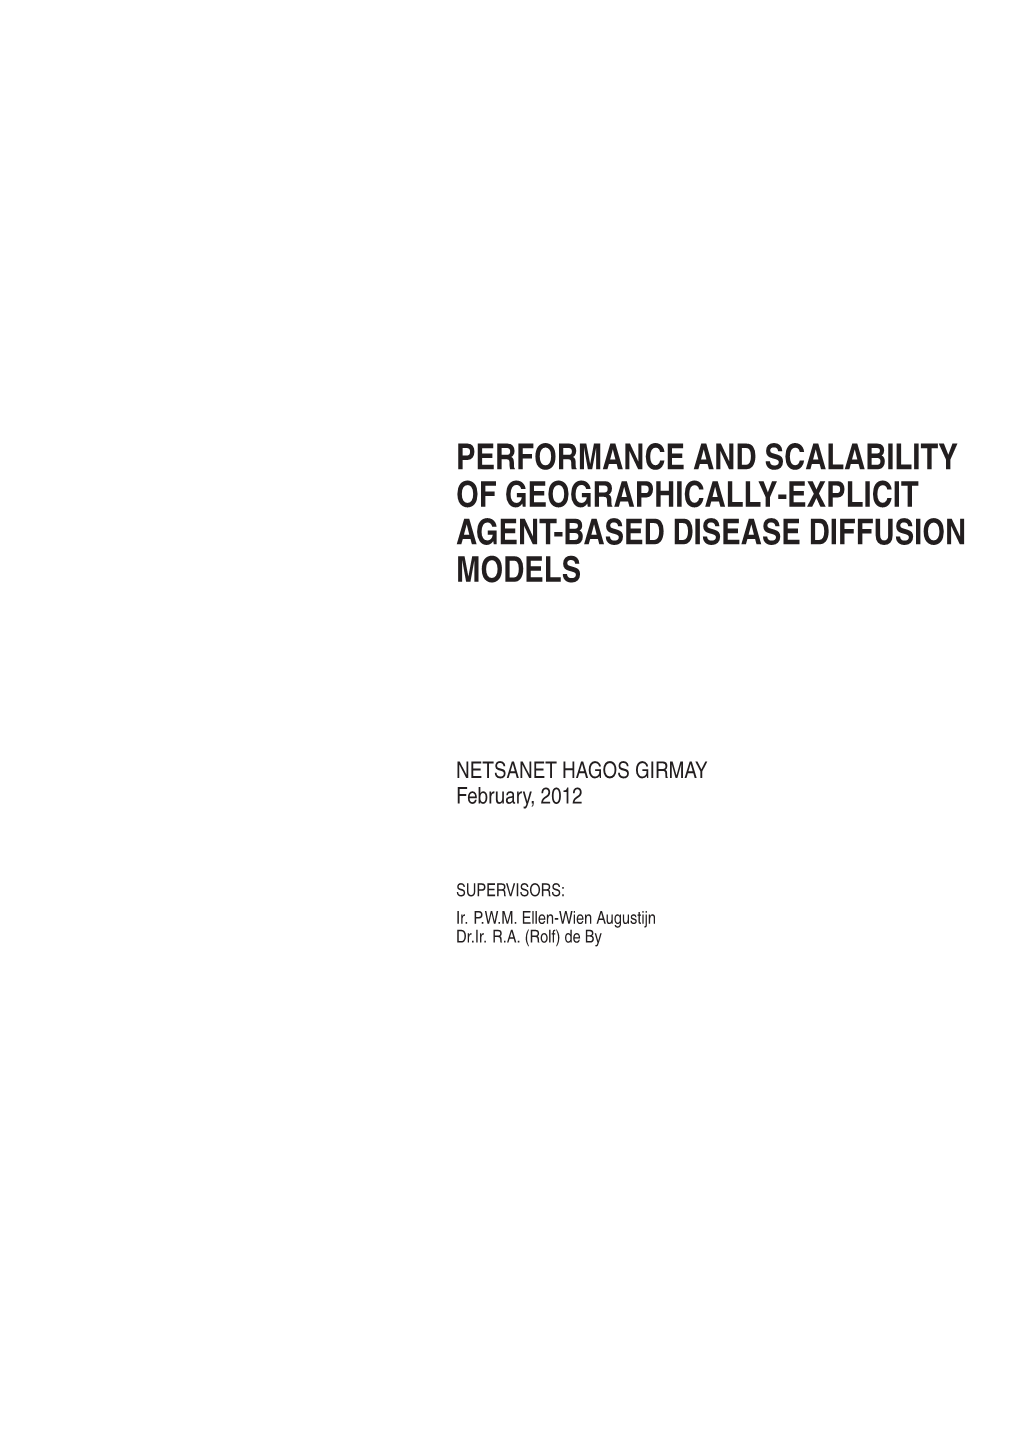 Performance and Scalability of Geographically-Explicit Agent-Based Disease Diffusion Models